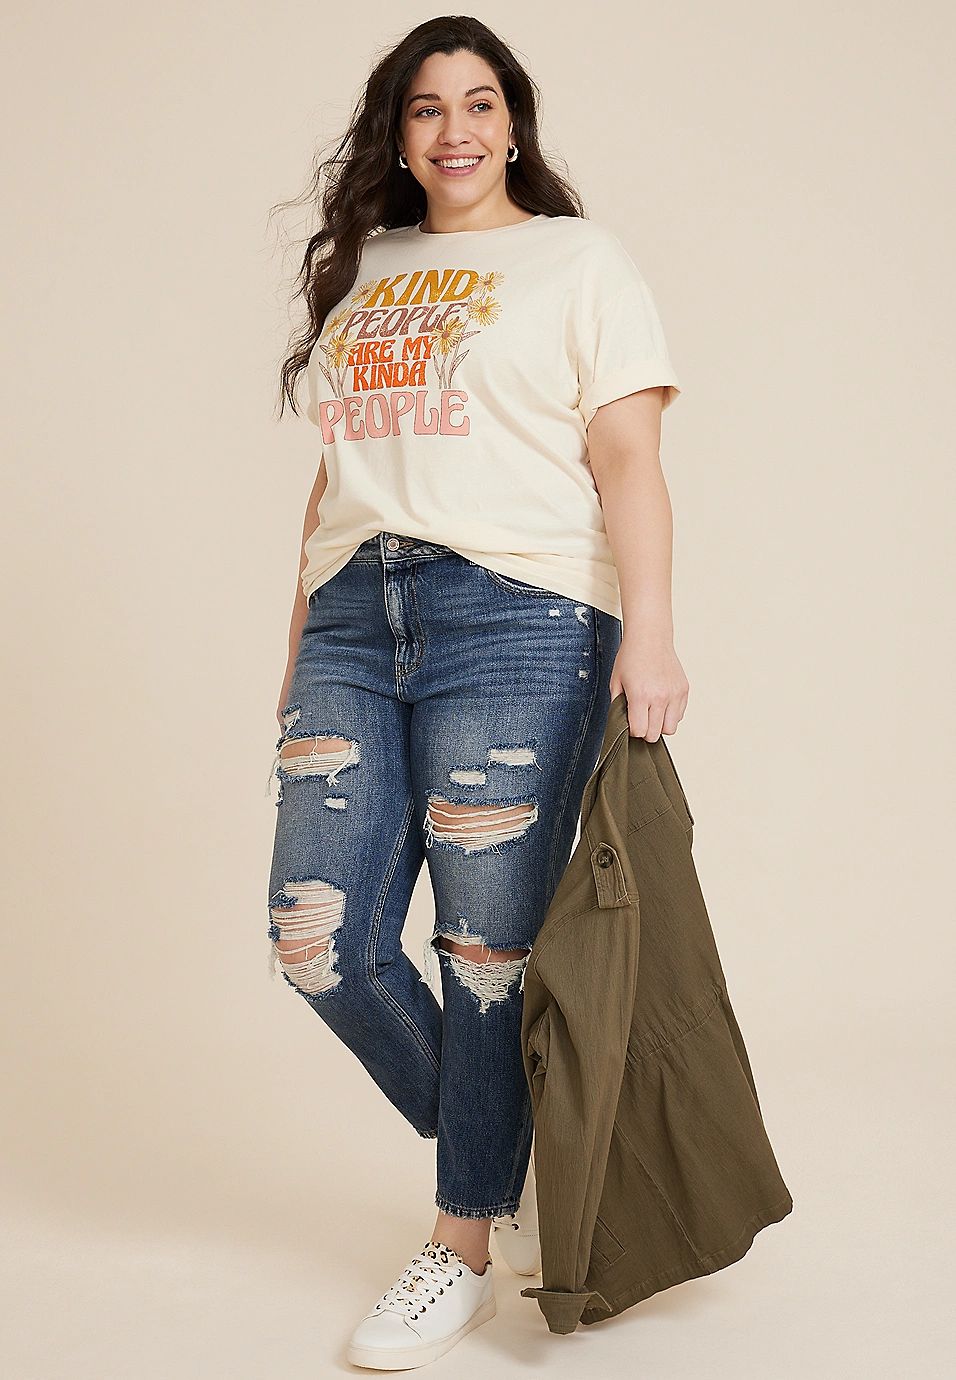 Plus Size Kind People Graphic Tee | Maurices